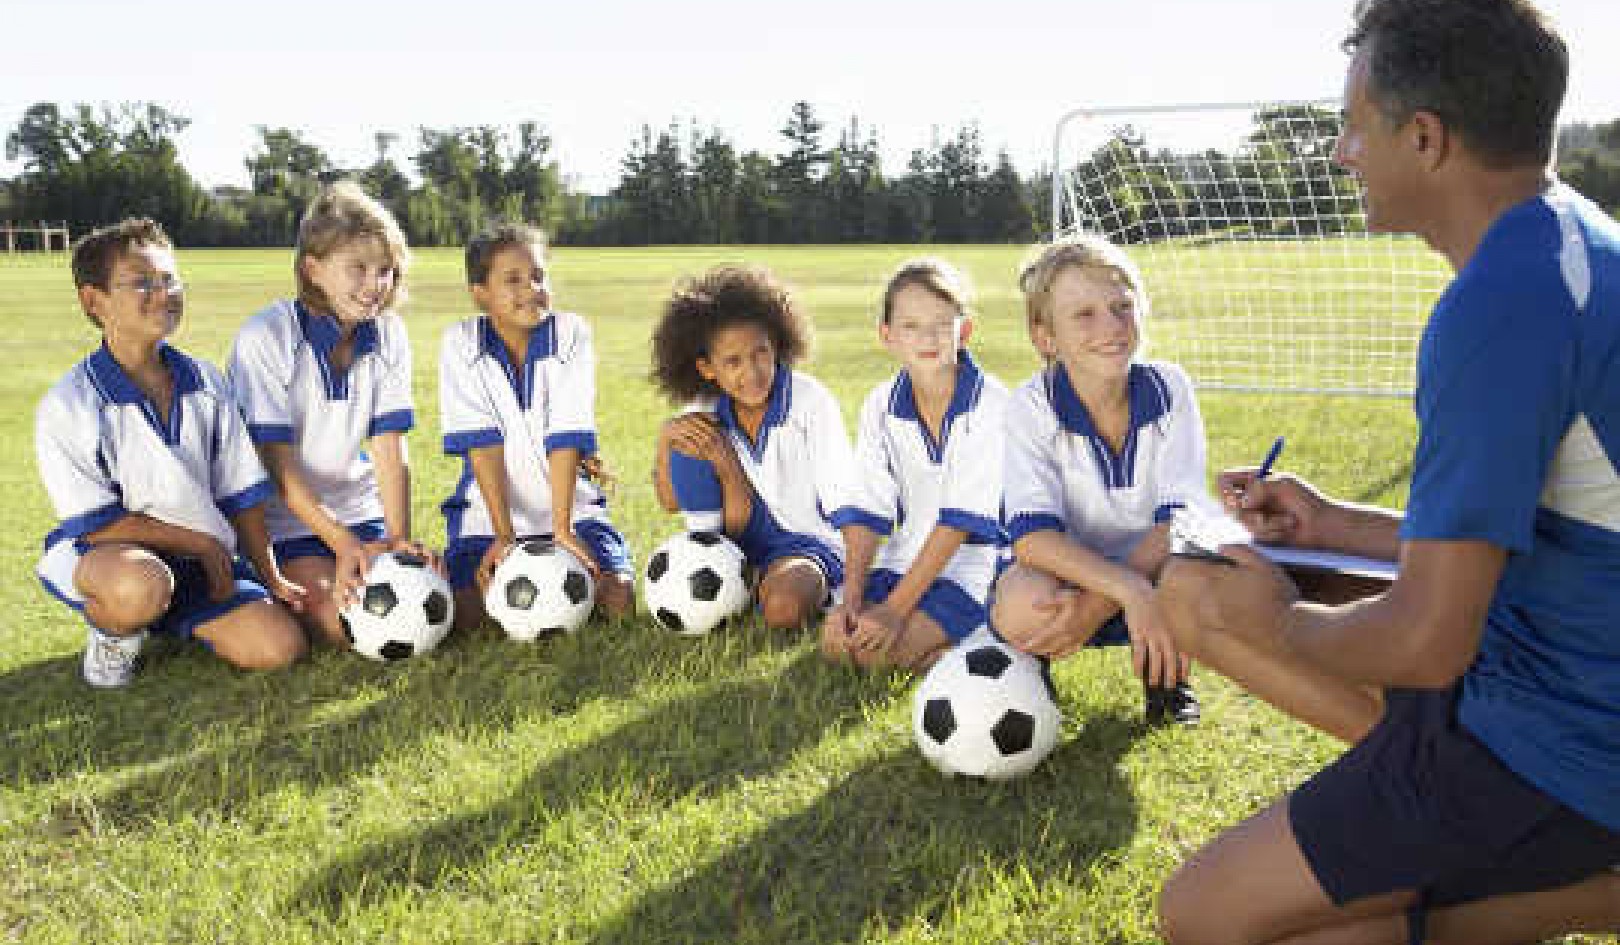 How To Protect Young Athletes From Abusive Coaches